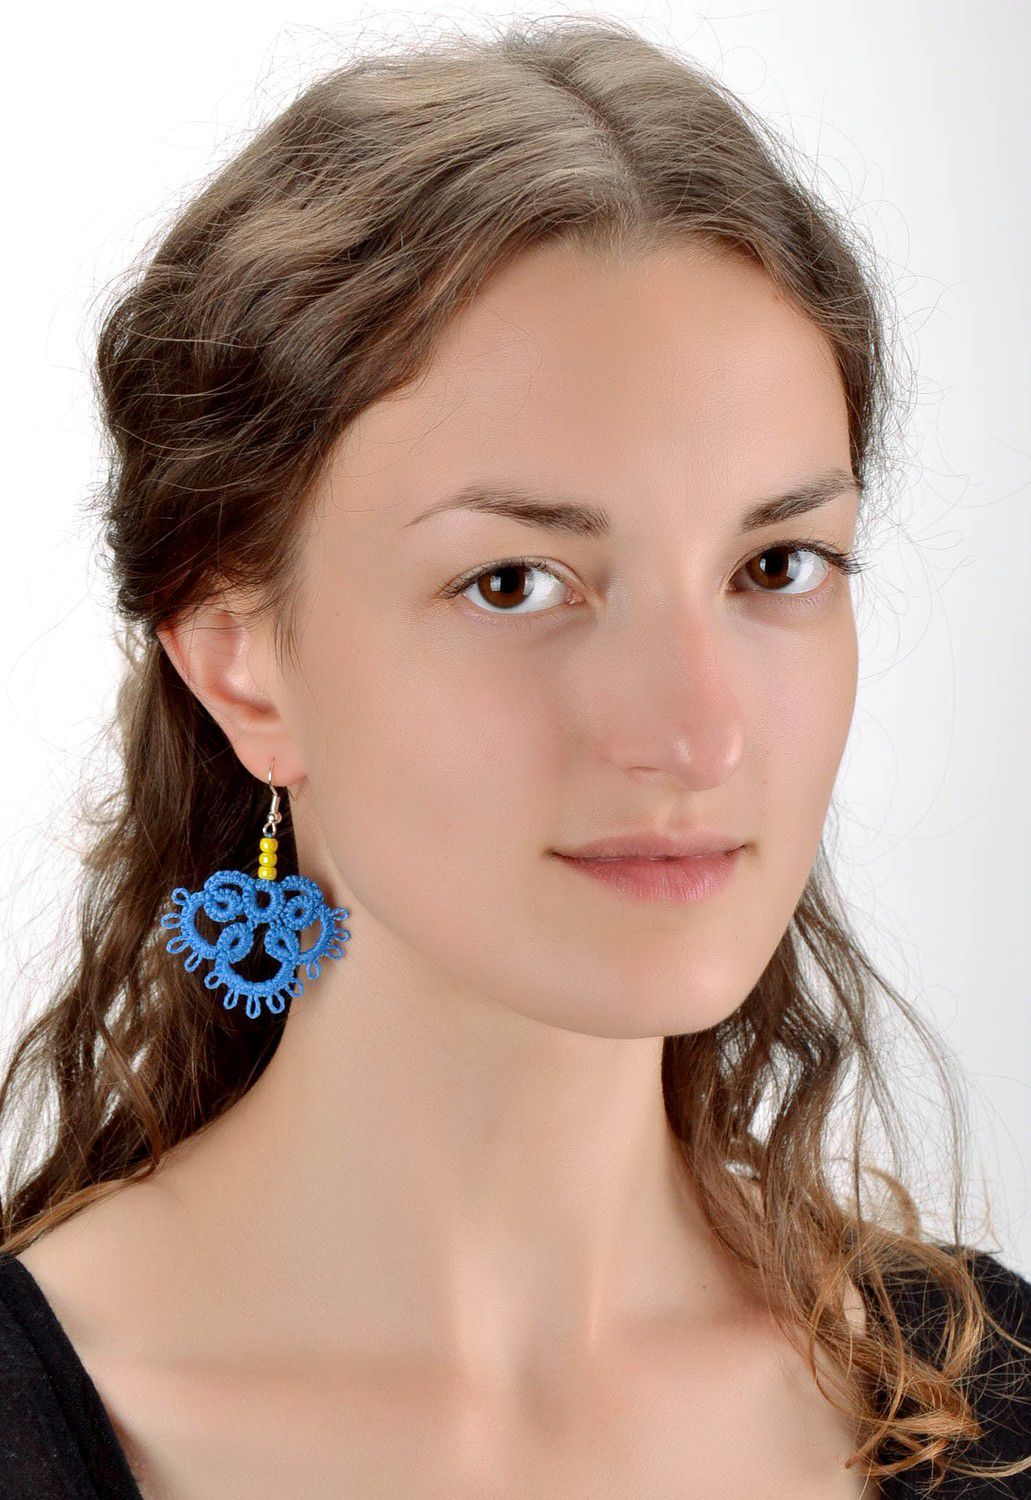 Handmade lace earrings made using tatting technique photo 5